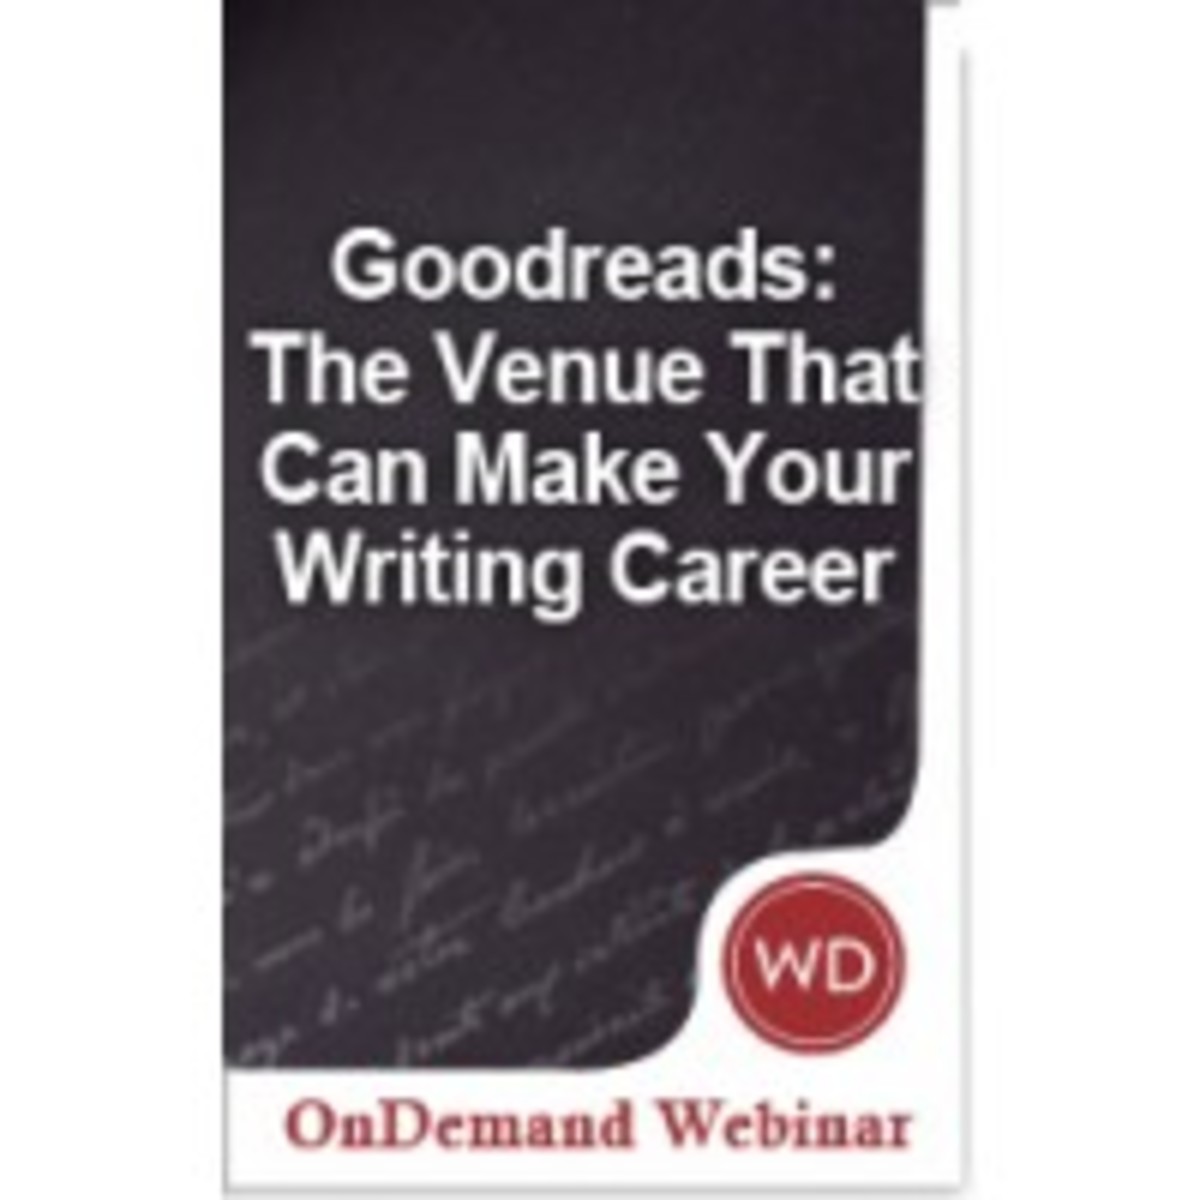 Goodreads: The Venue That Can Make Your Writing Career